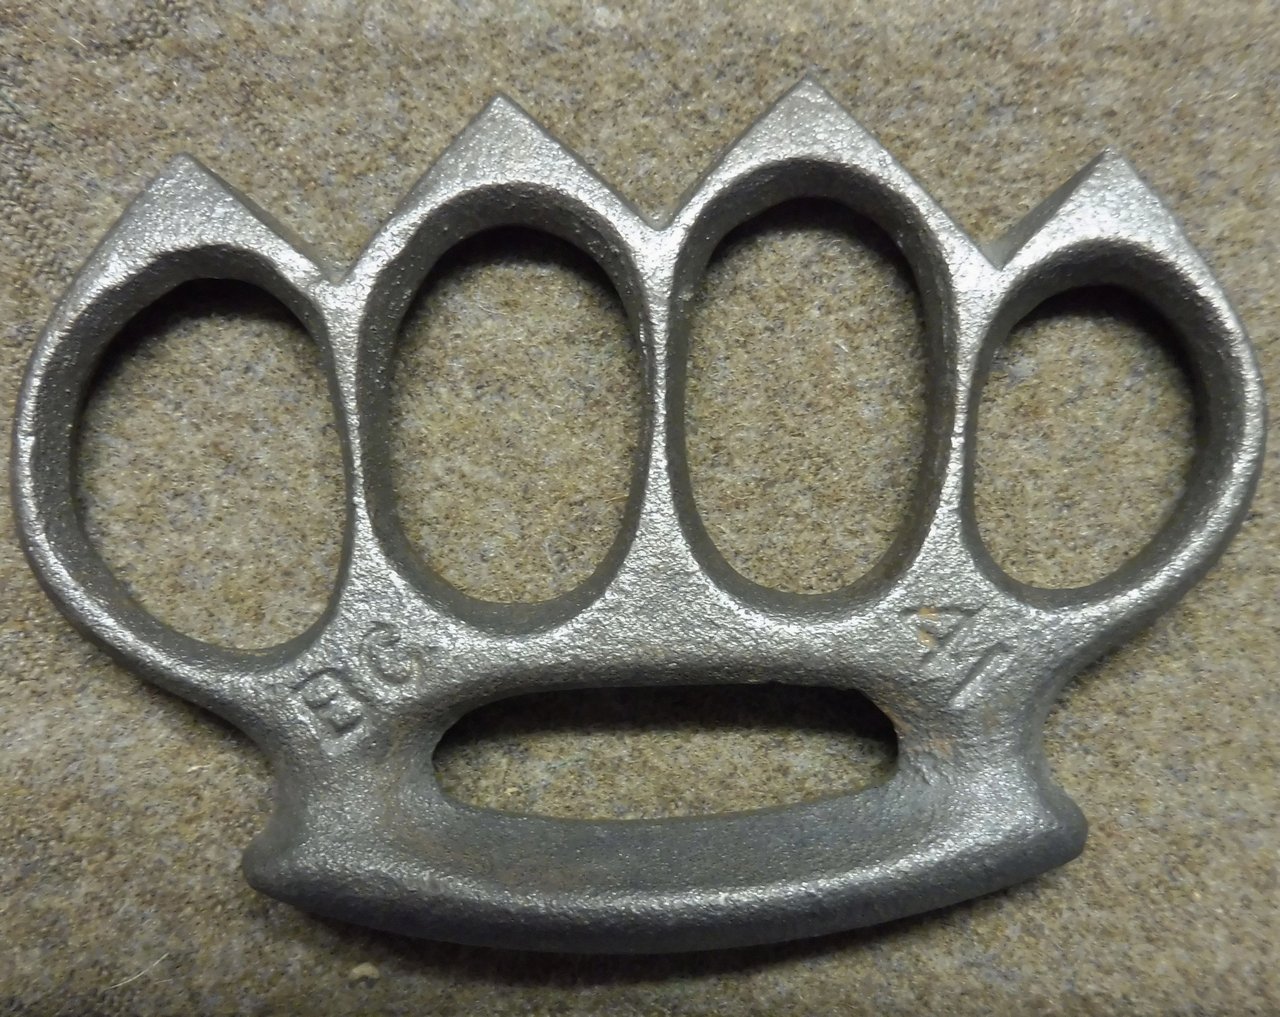 https://www.staybehinds.com/files/equipment/Knuckleduster%20BC41.jpg